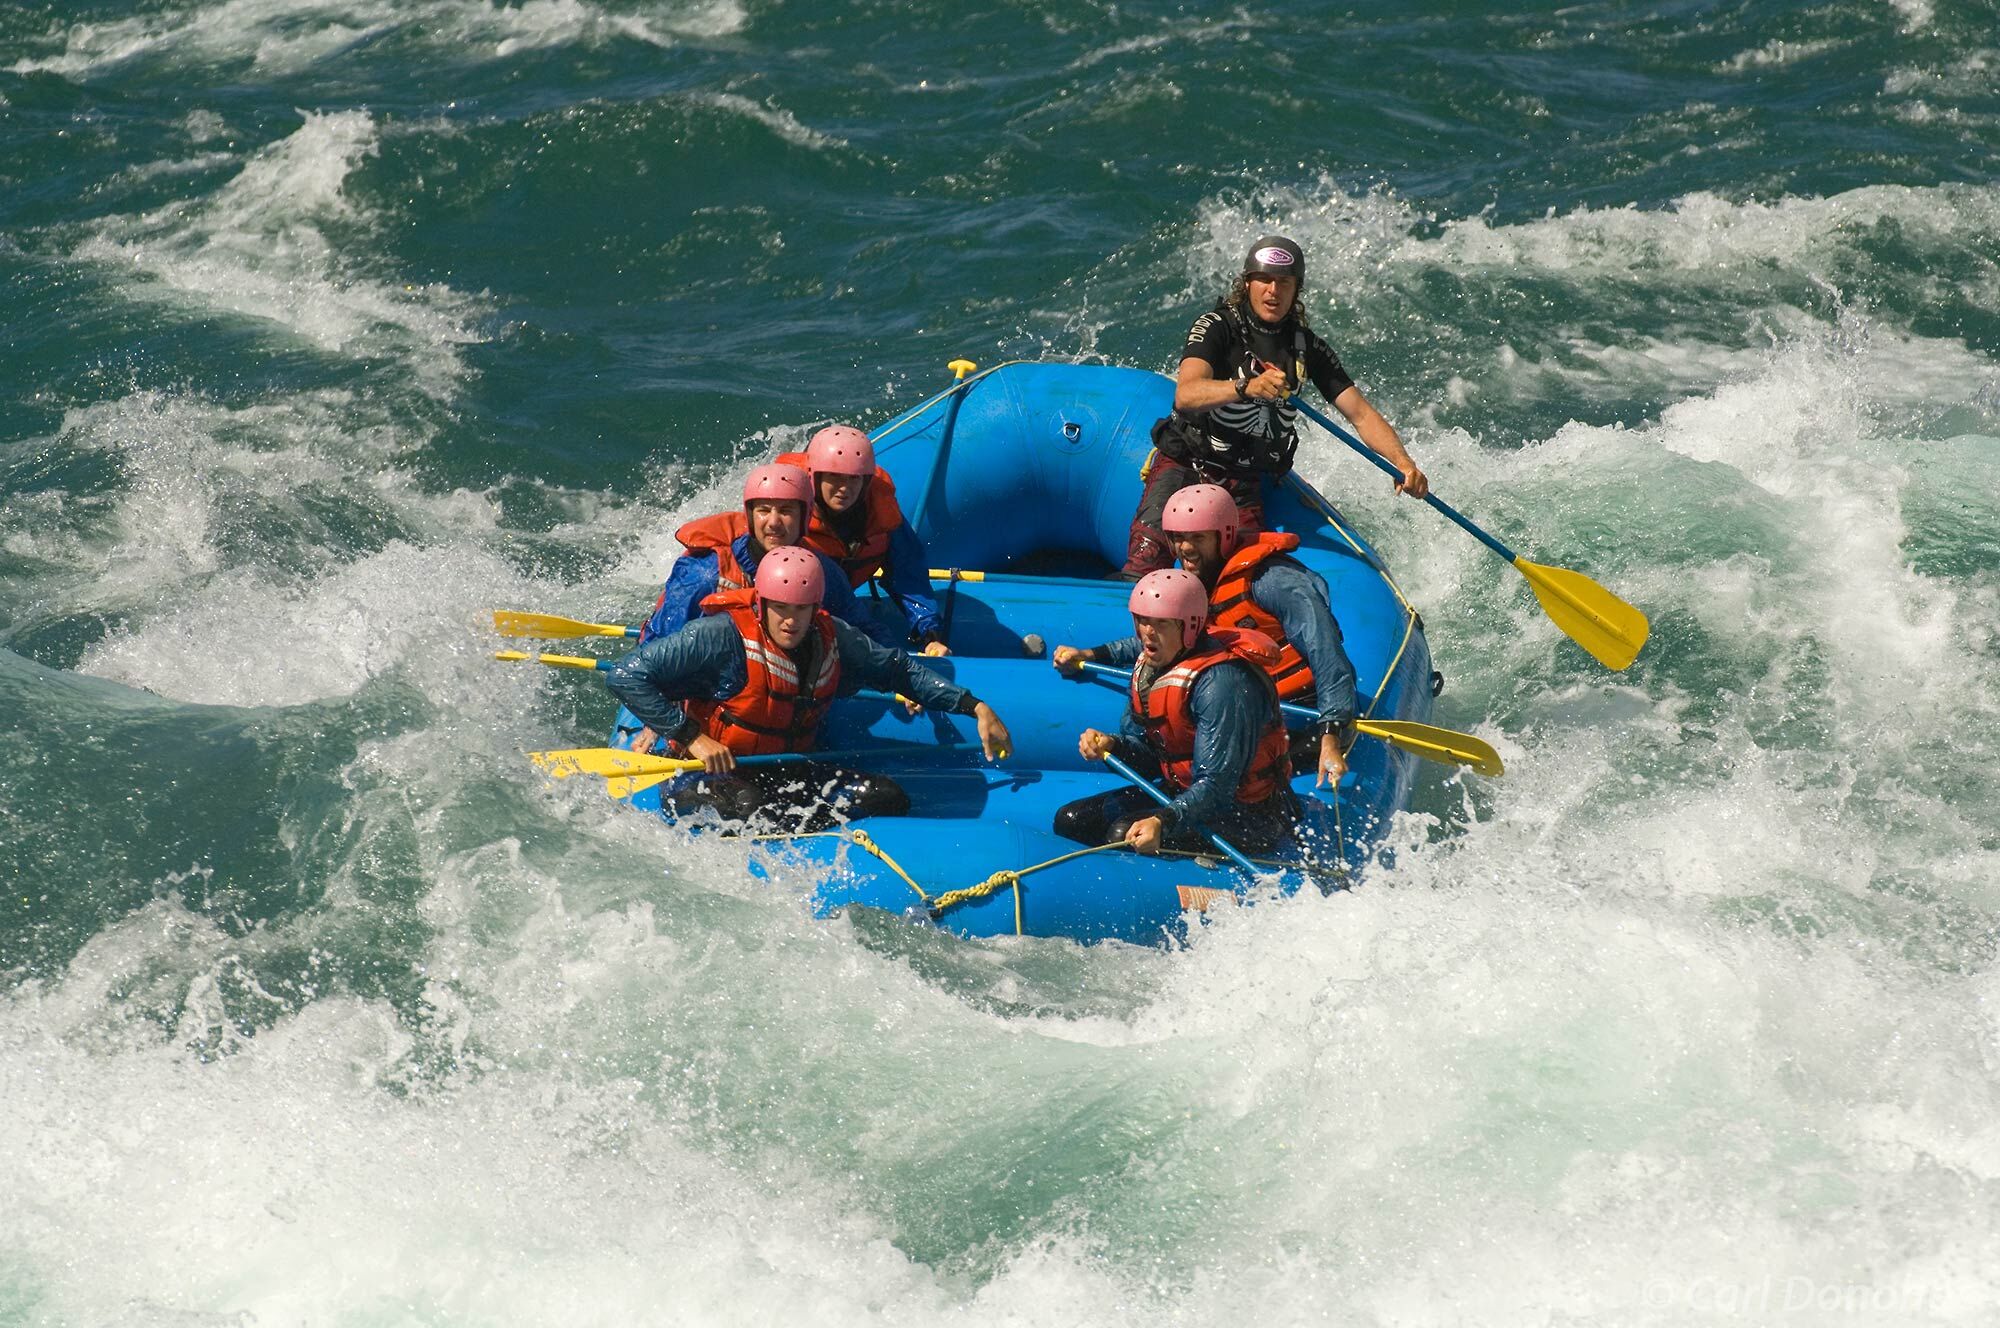 Whitewater rafting on the Futaleufu River. The Bridge to Bridge section, Puente a Puente. Rafting a Class IV whitewater rapid...